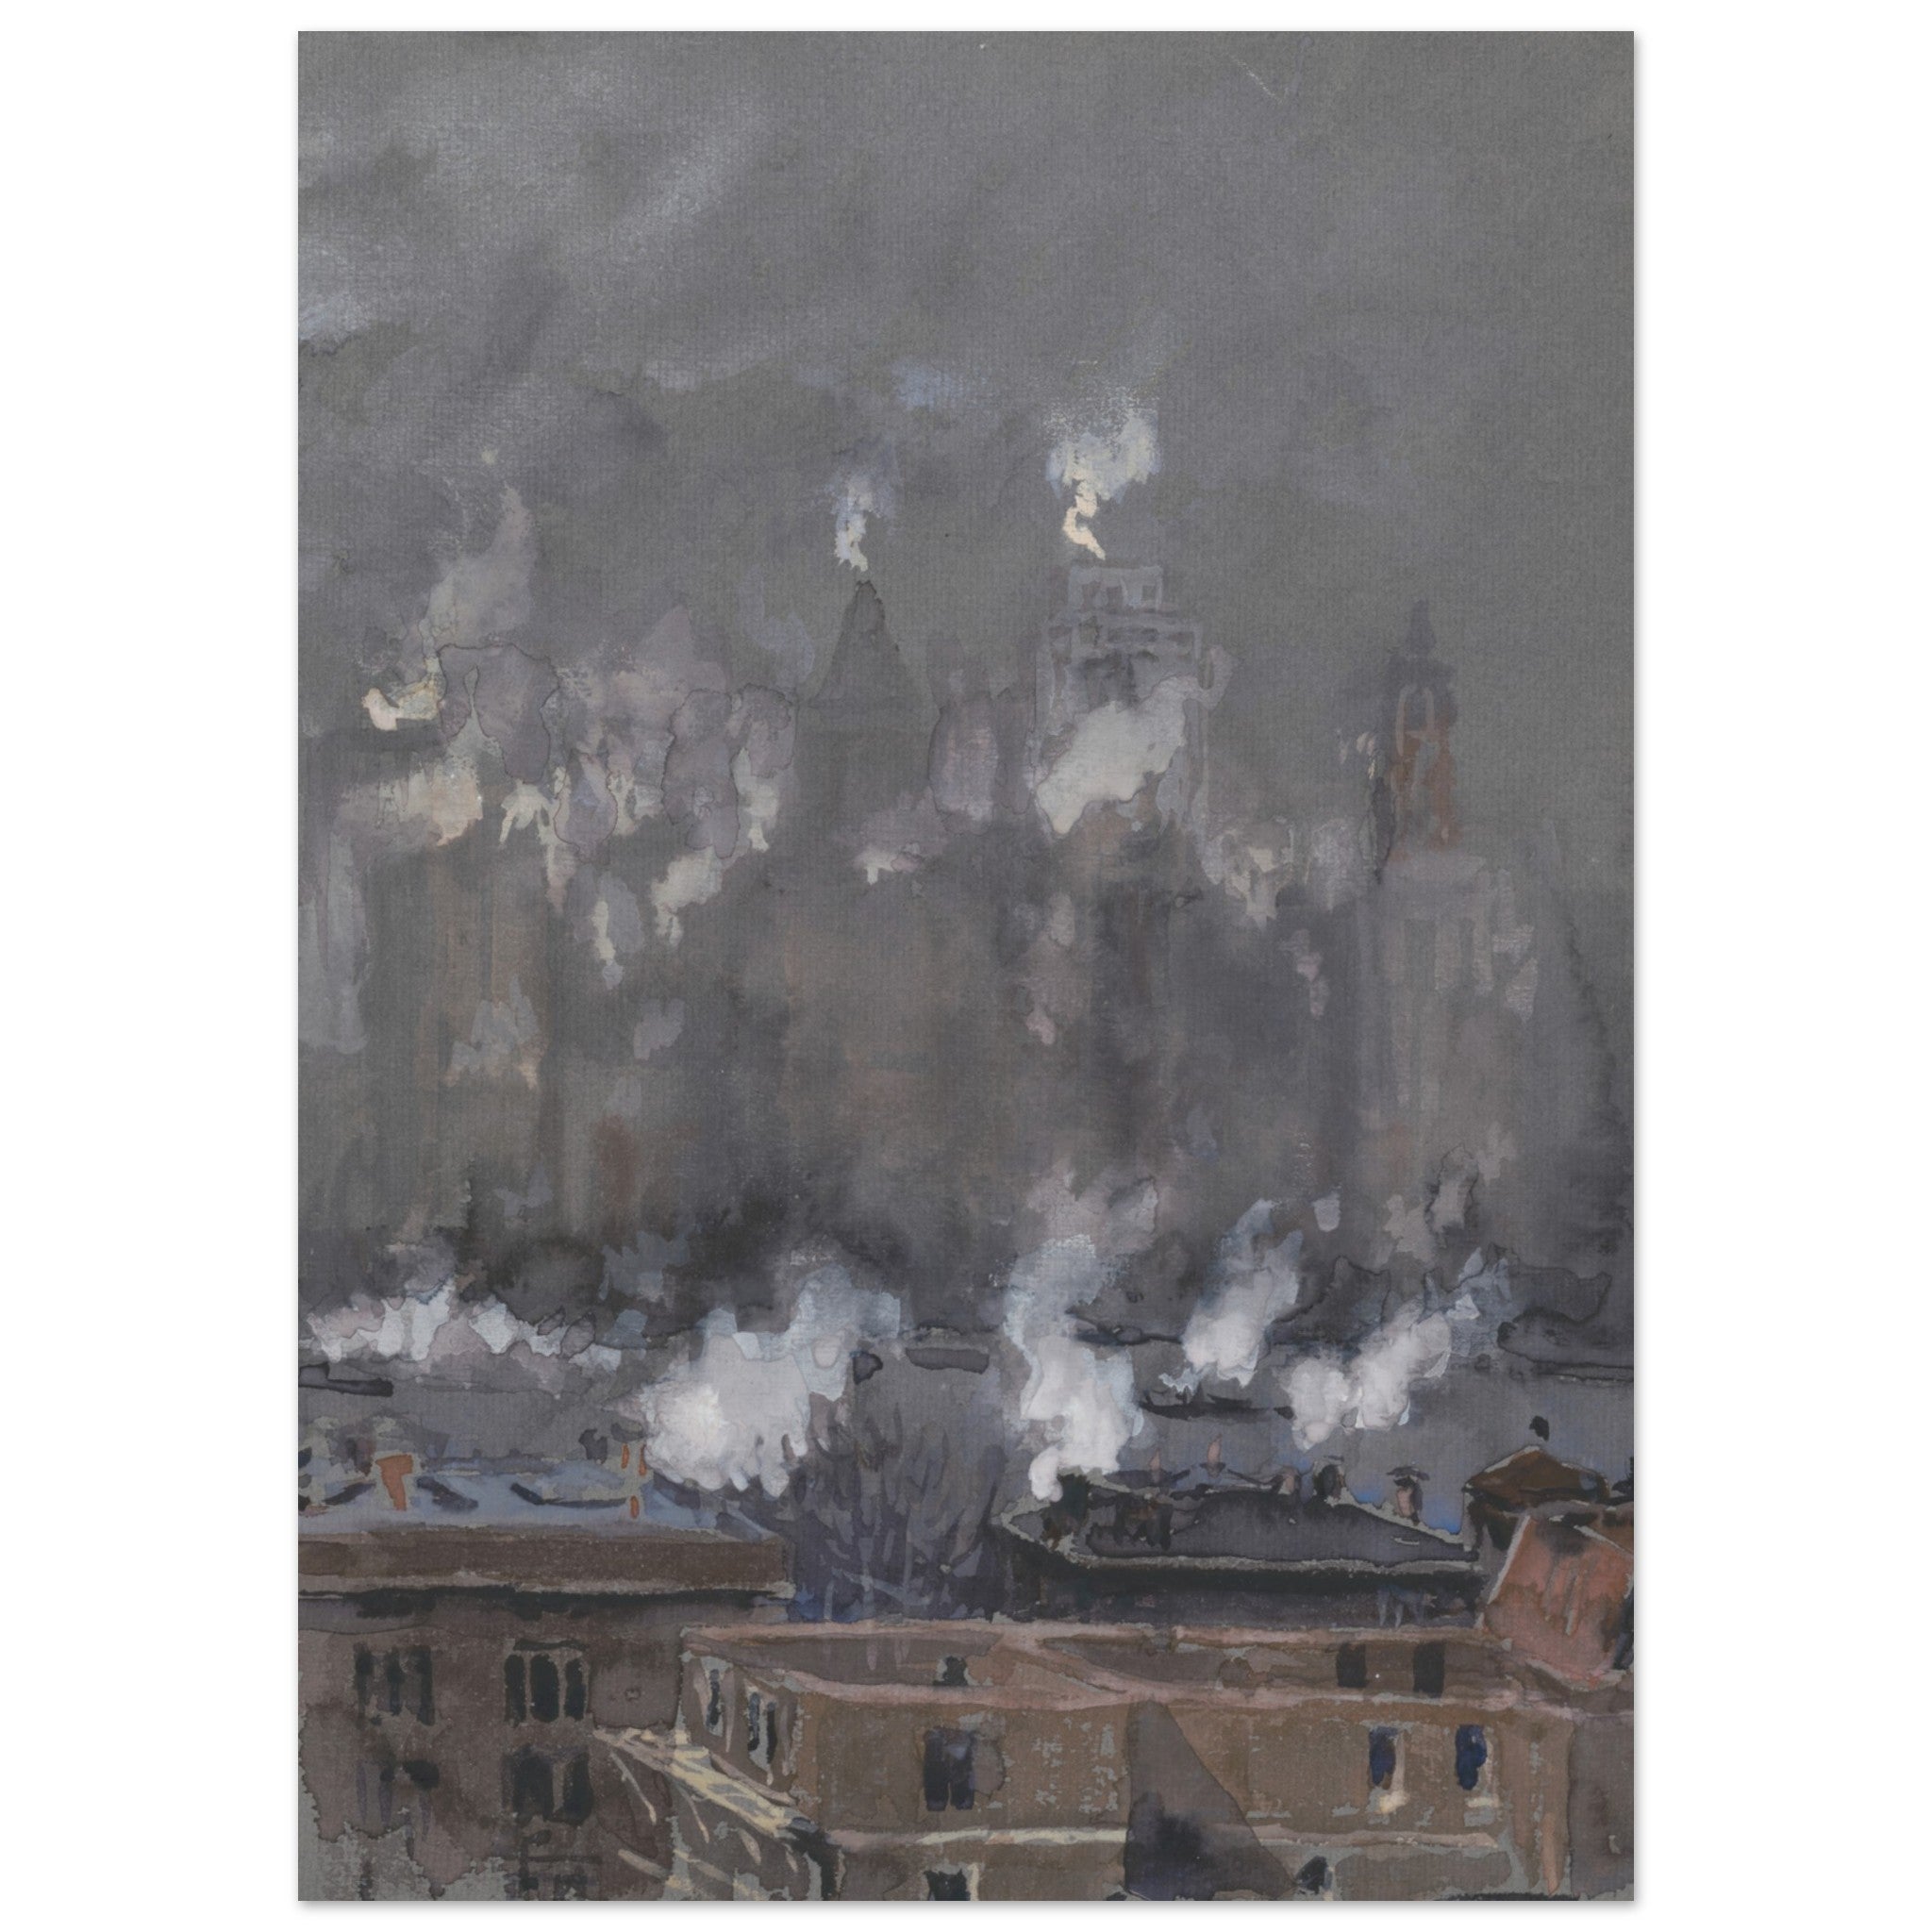 Joseph Pennell Poster - Smoke And Fog On Gray Day, New York City